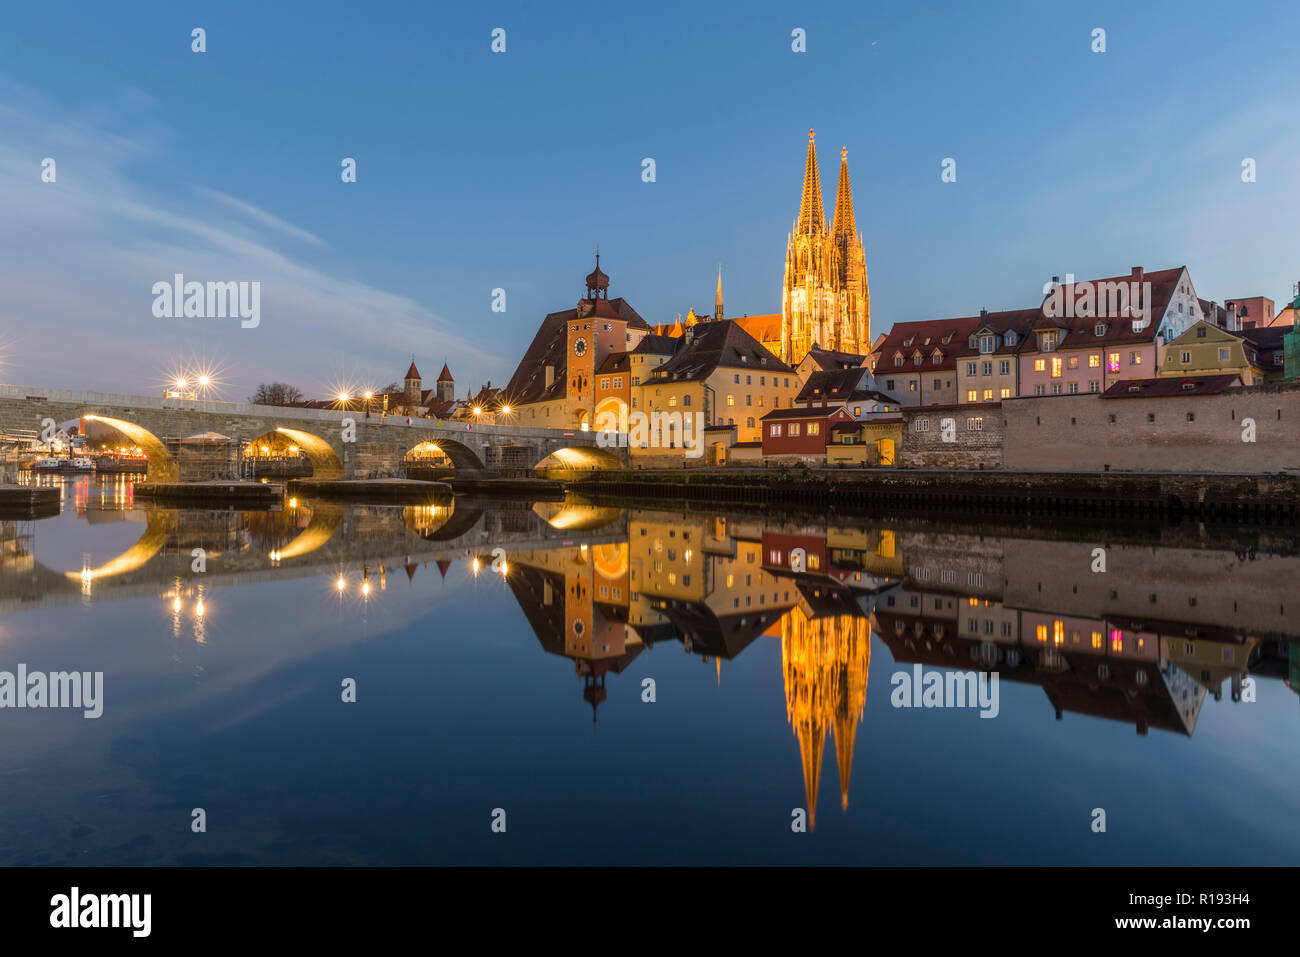 Evening view of the Stone Bridge, St. Peter's Church and the Old Town of Regensburg Stock Photo